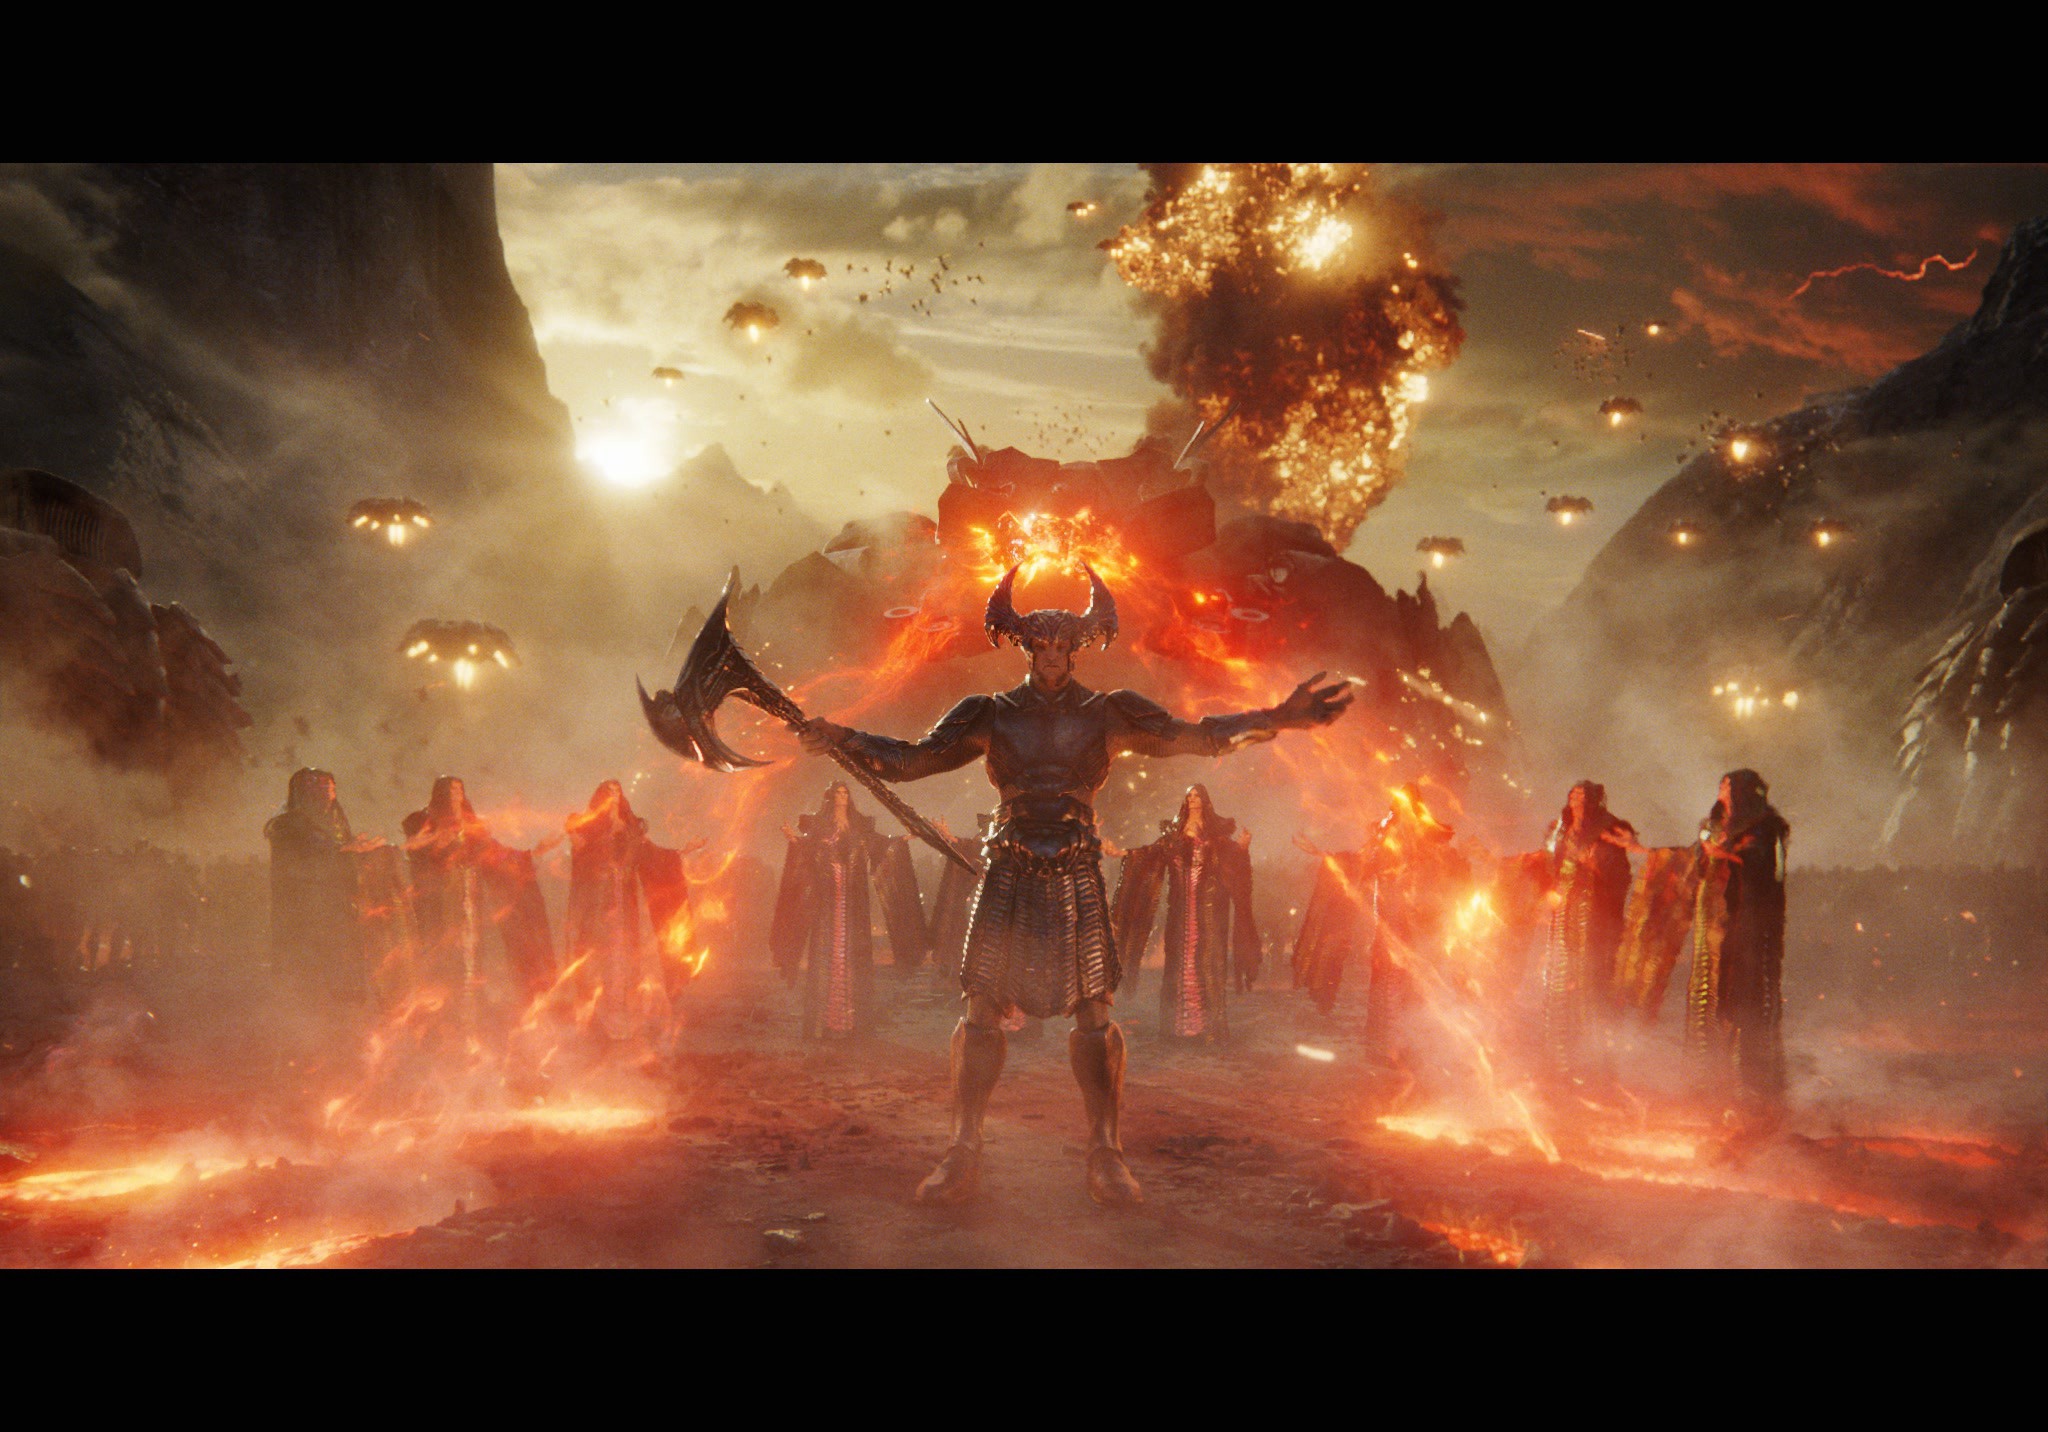 zack snyders justice league visual effects snyder darkseid har shots hl 0230 232 1082  theatrical version